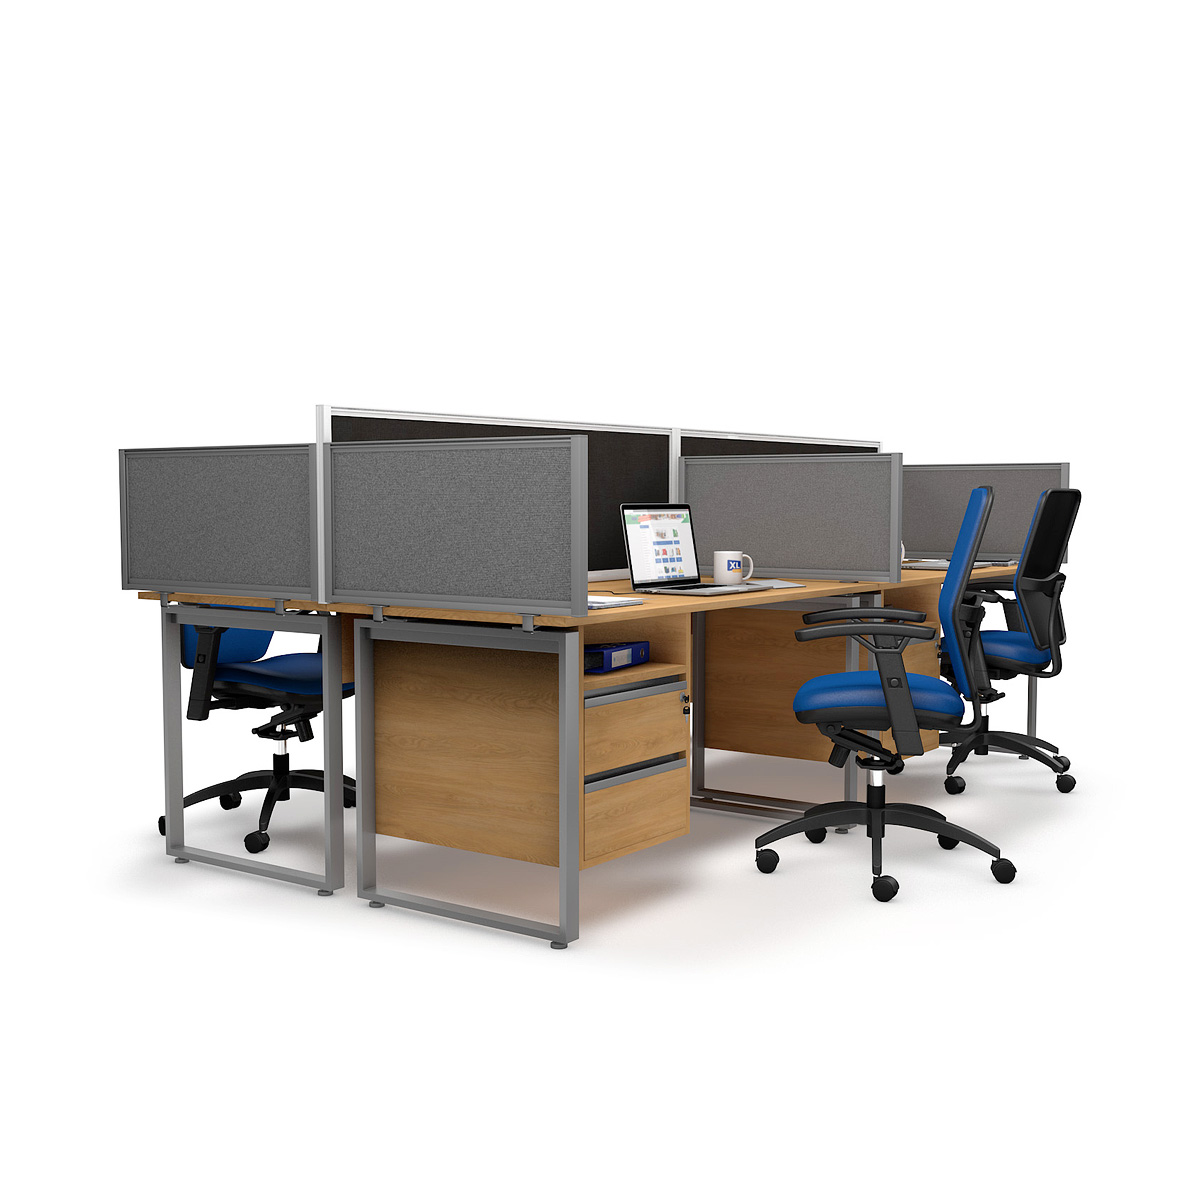 FRONTIER® Acoustic Desk Divider Screens For Offices